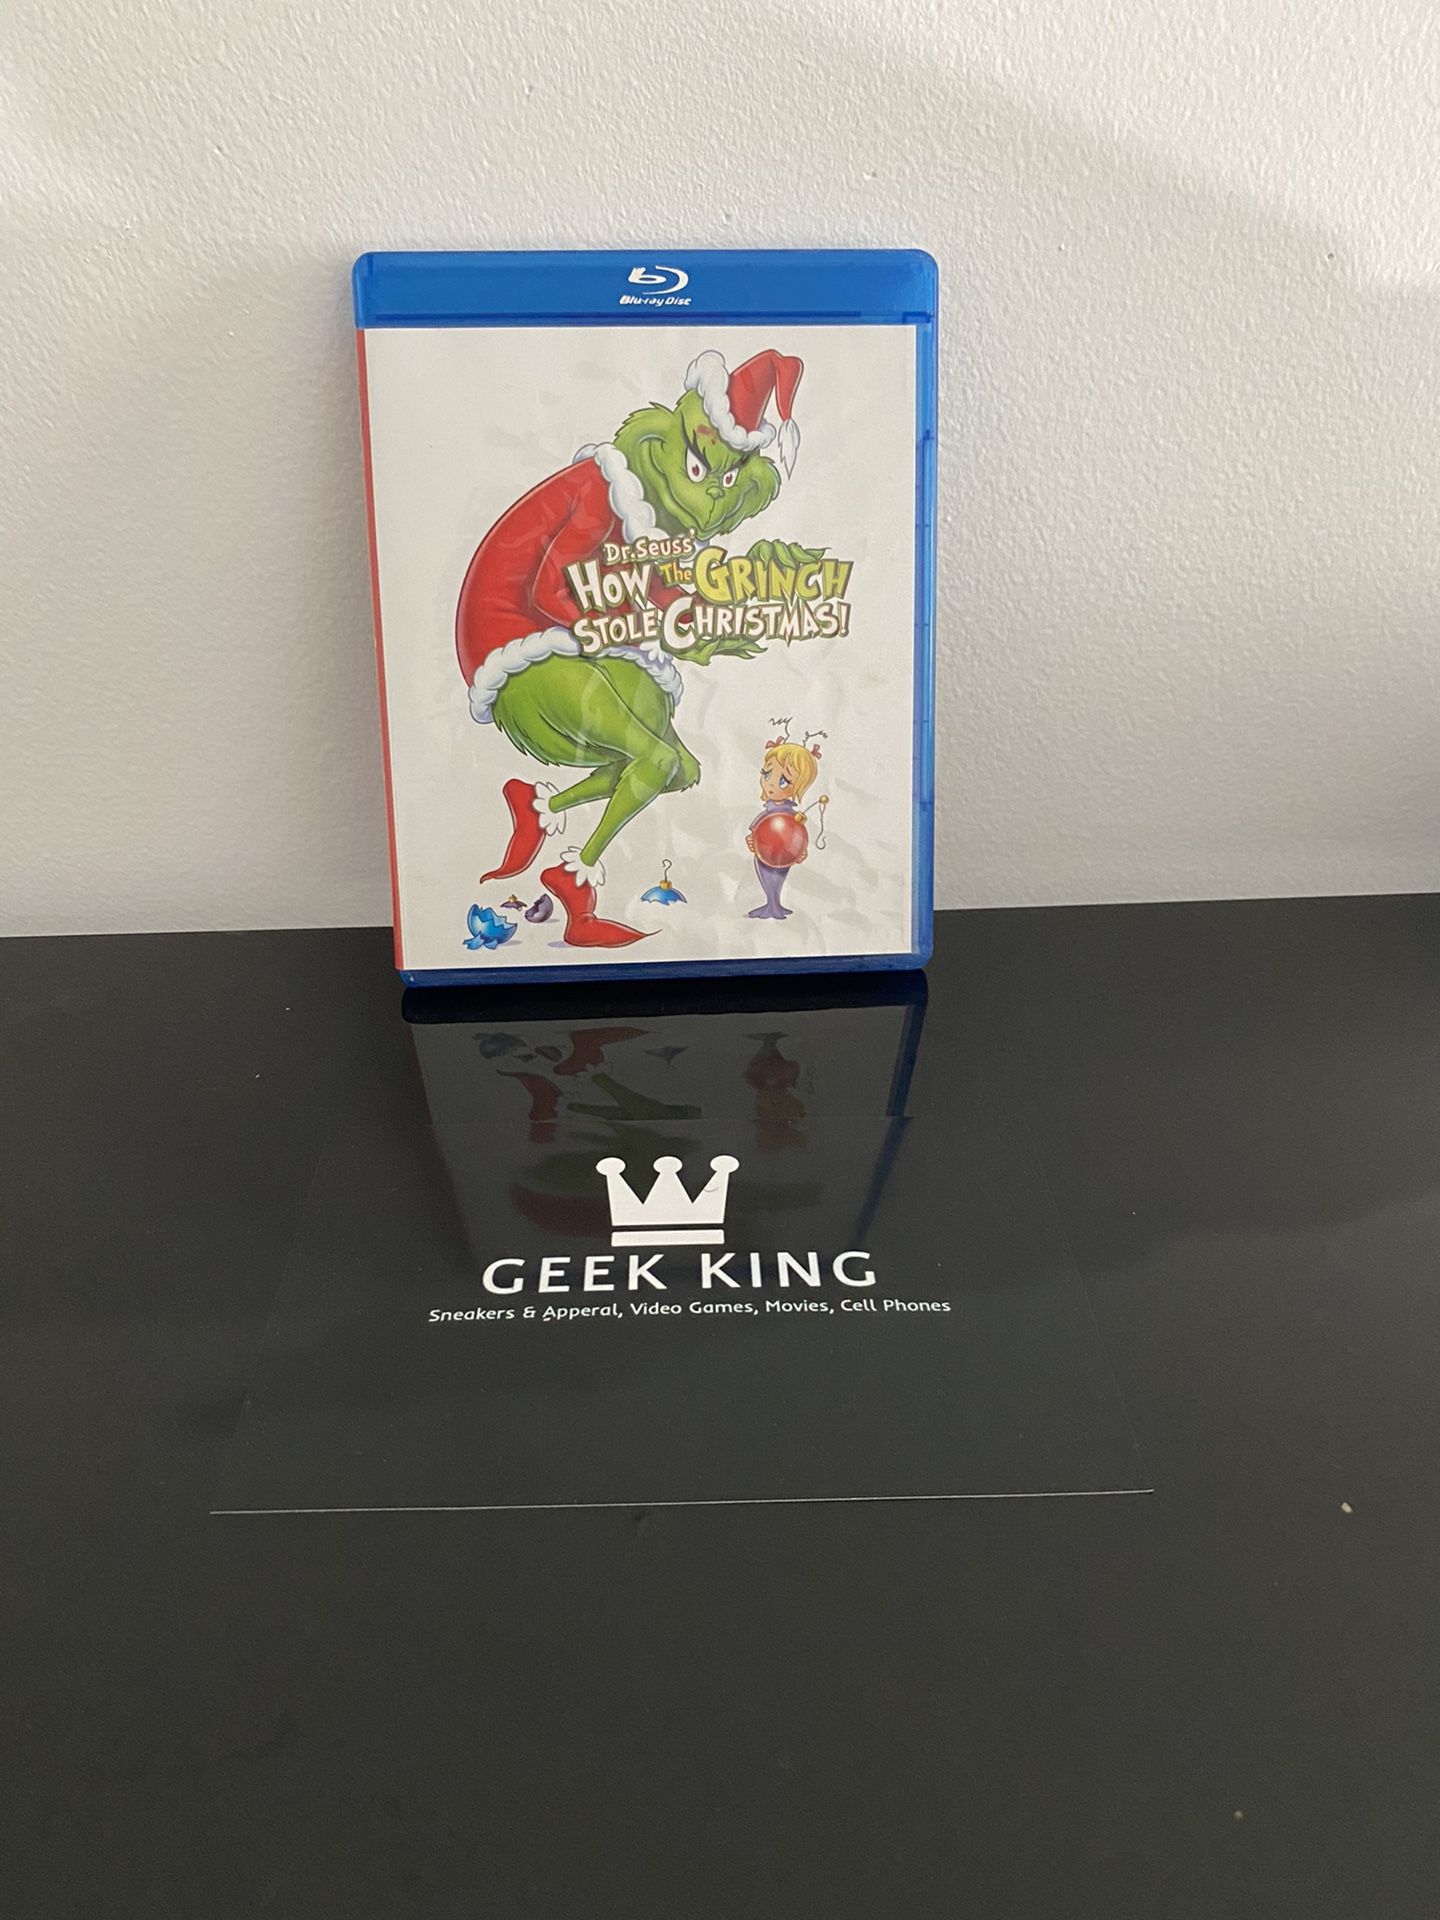 Original How the Grinch stole Christmas Blu-ray